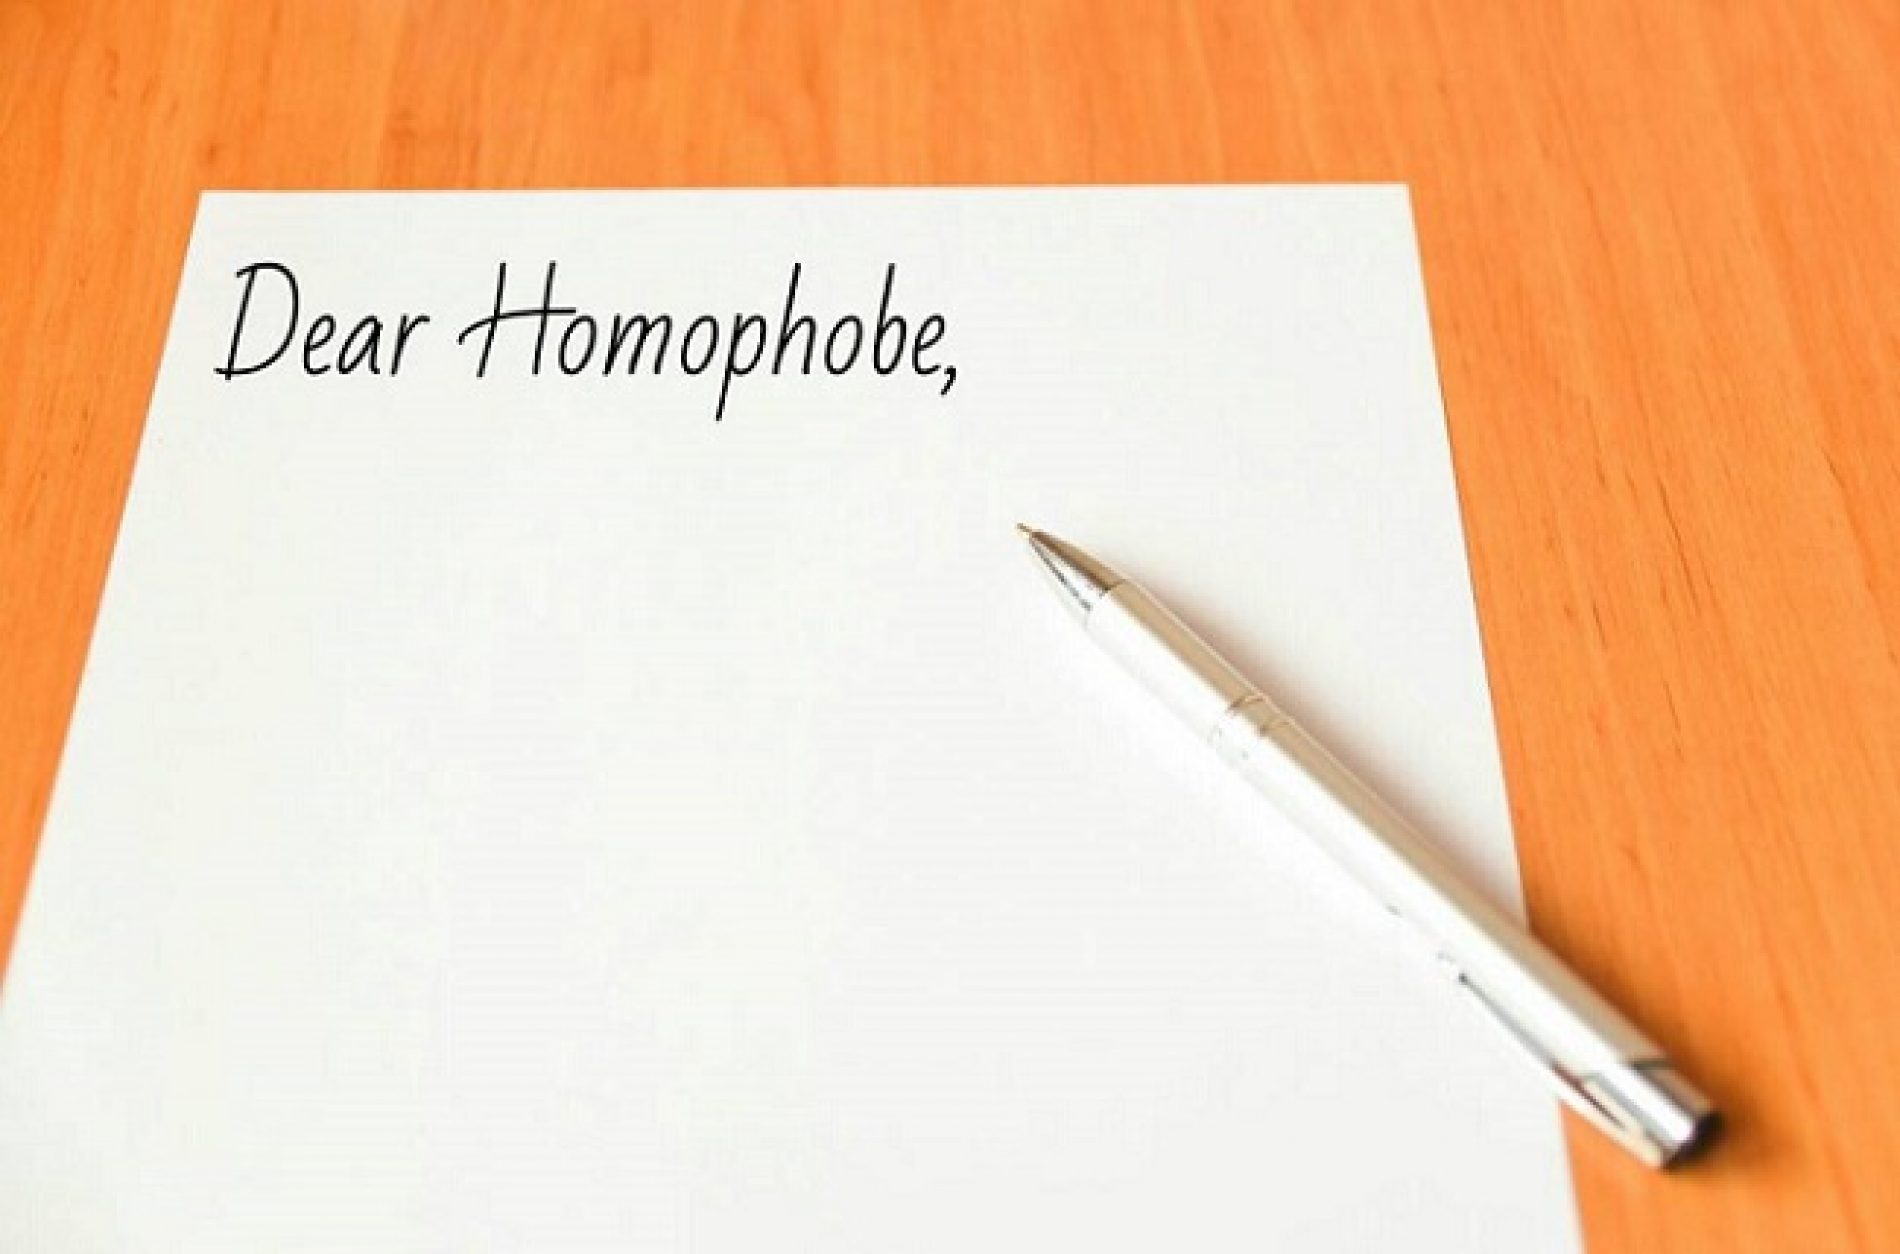 LETTER TO MY HOMOPHOBIC EX-FRIEND